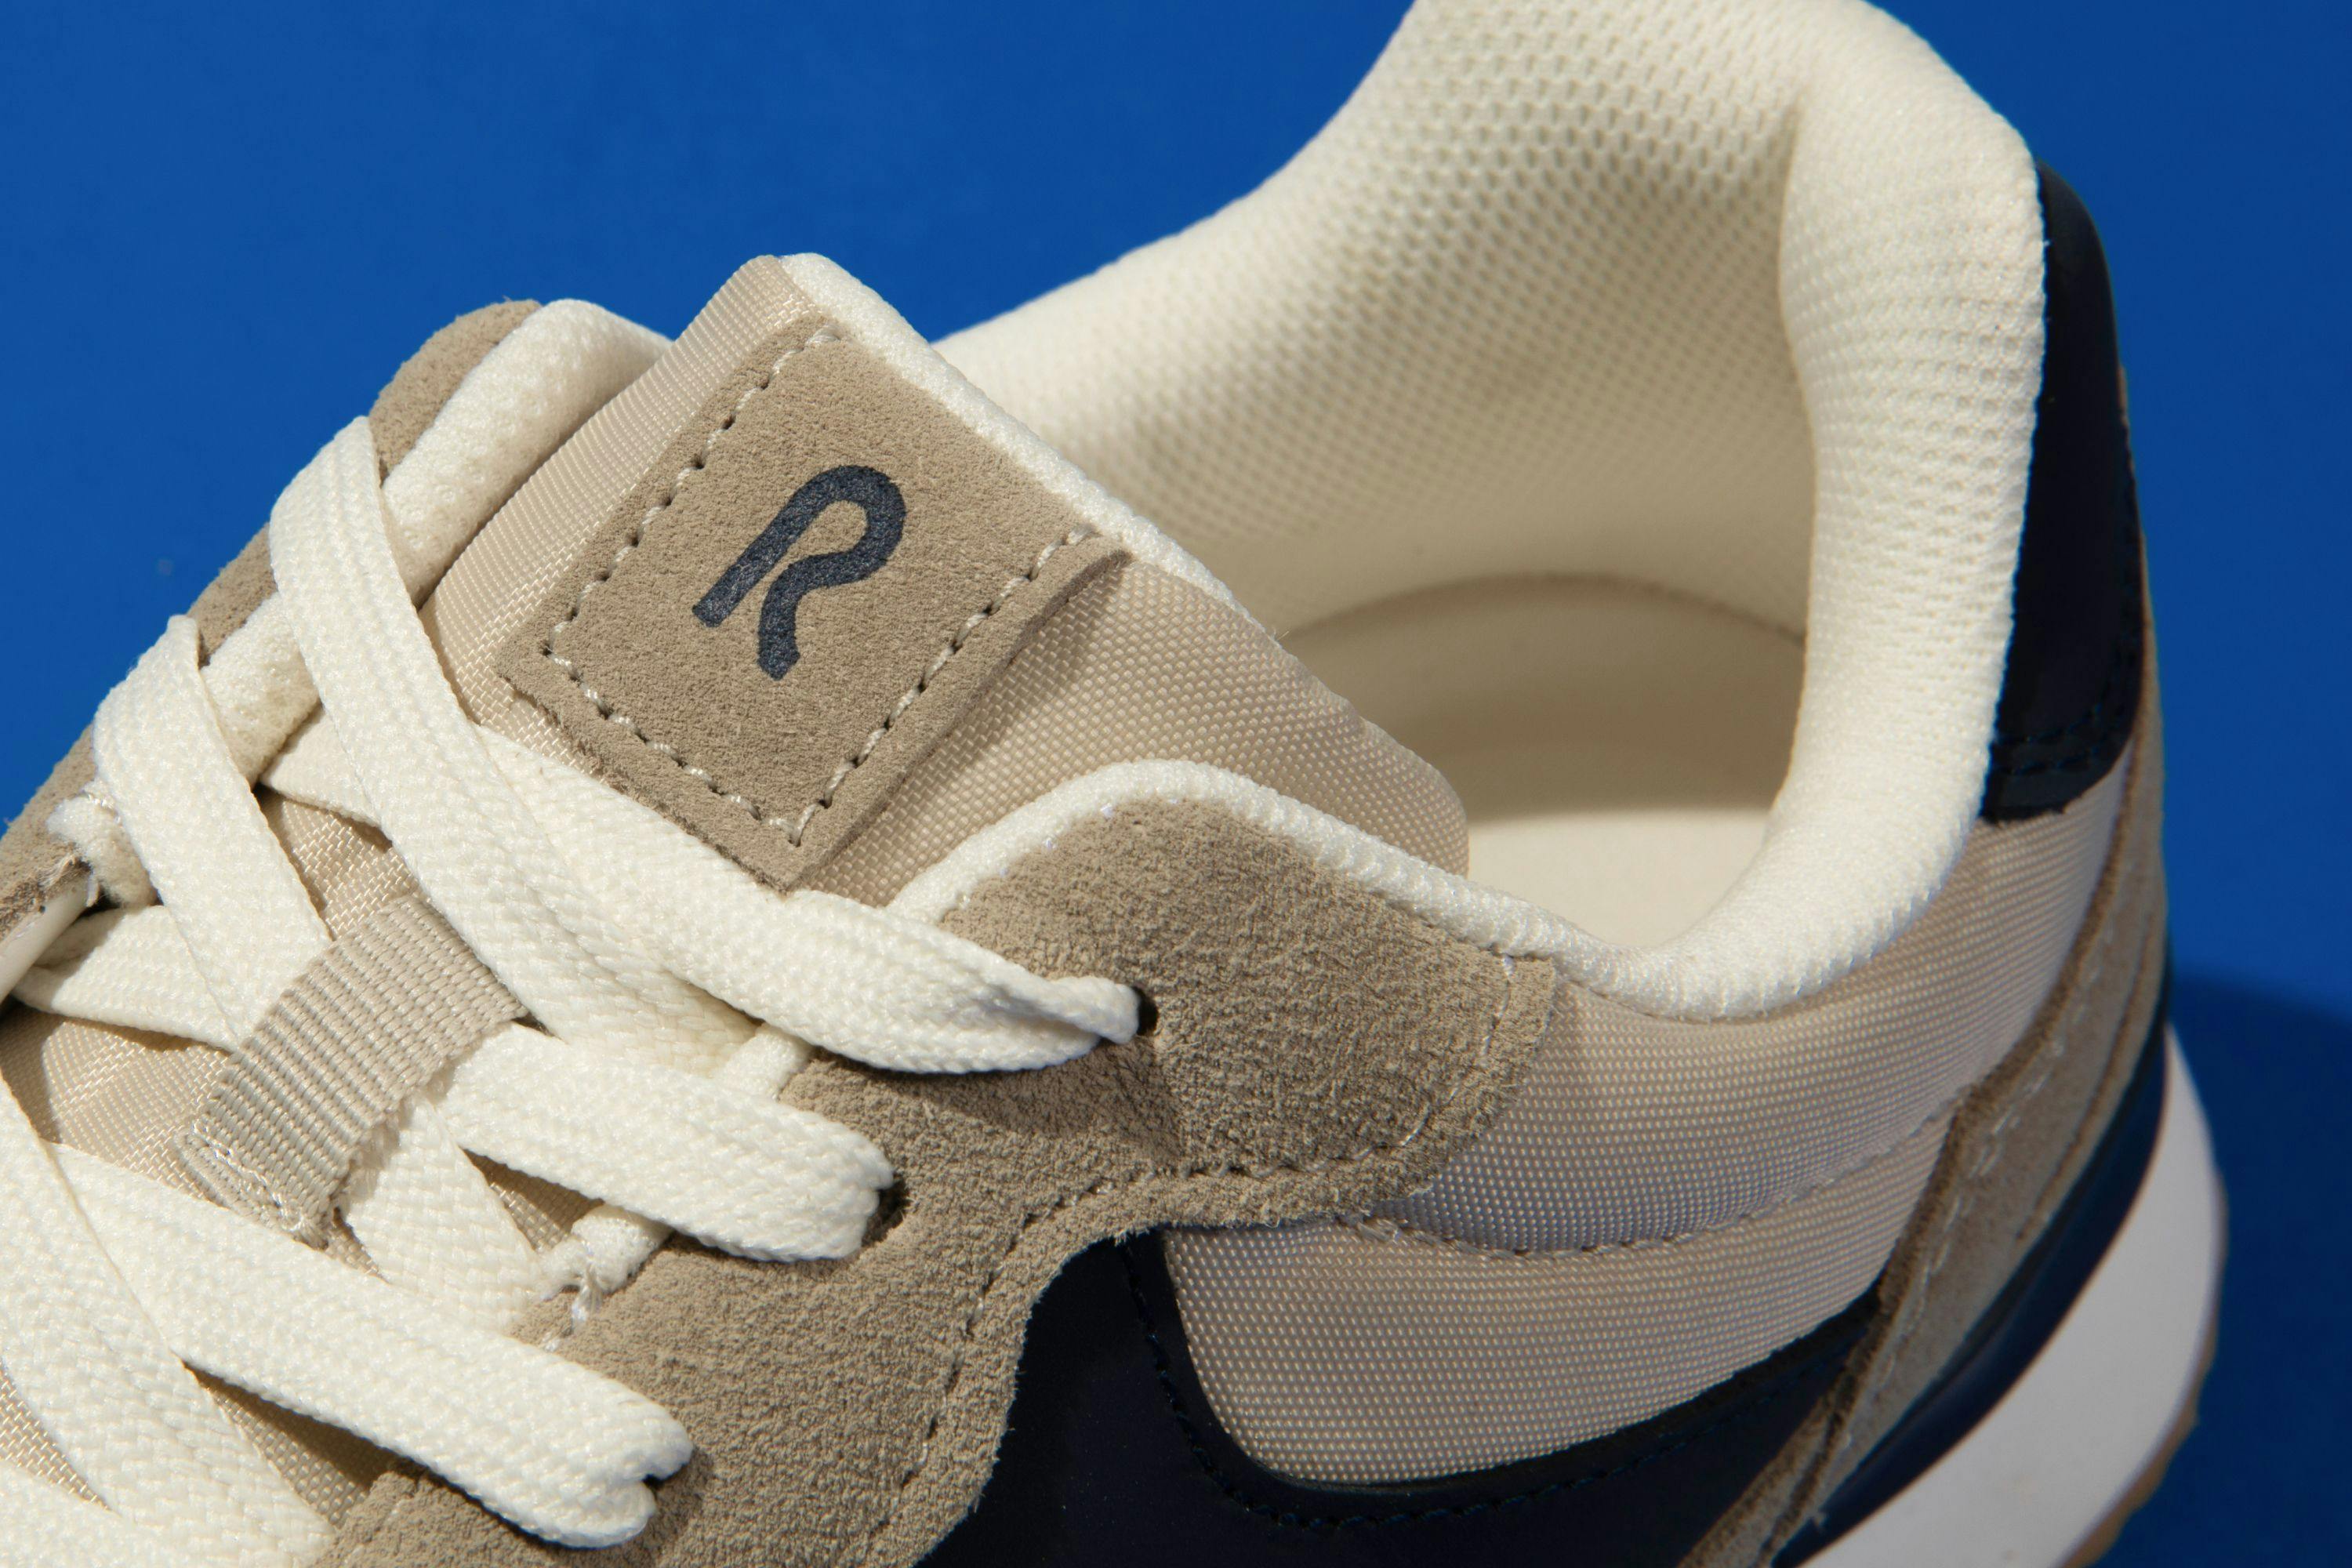 Close view of tongue and laces of R.O.W. branded shoe